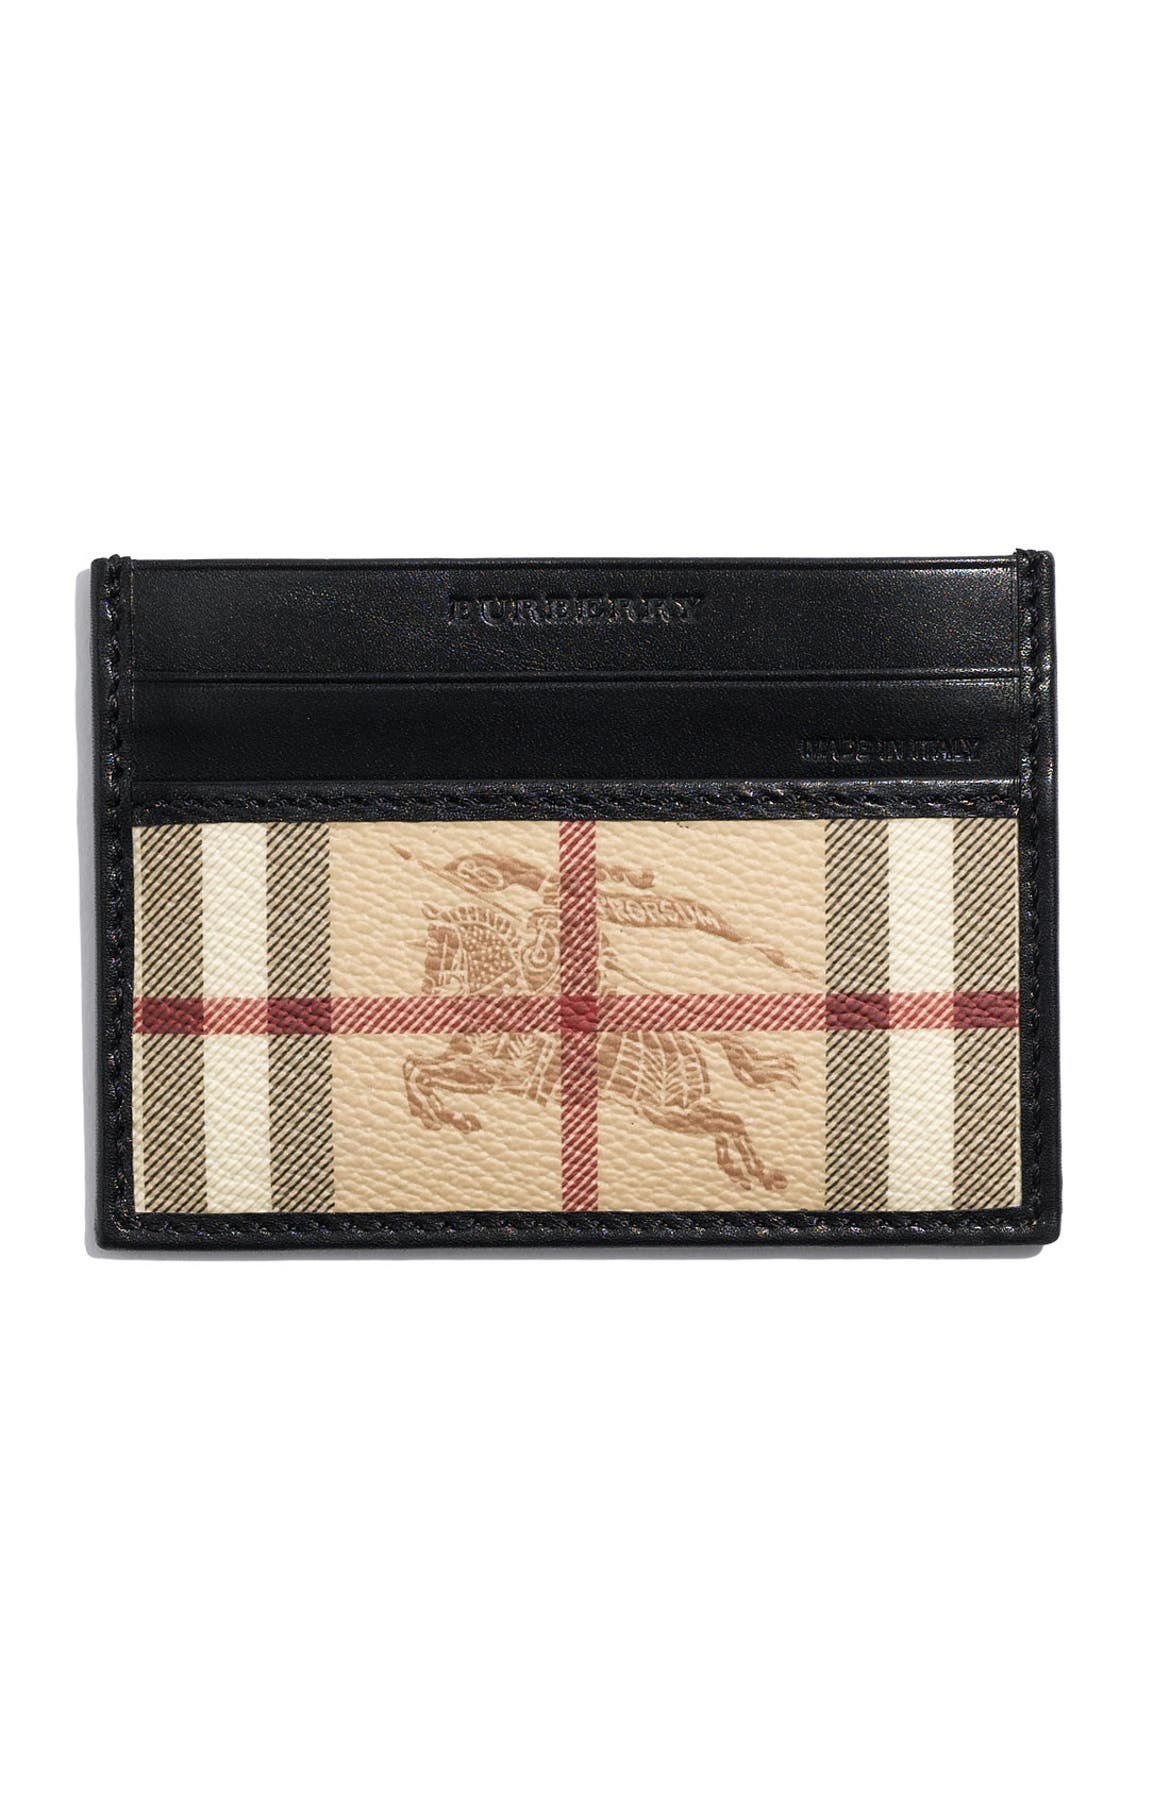 Burberry Check Print Card Case | Nordstrom